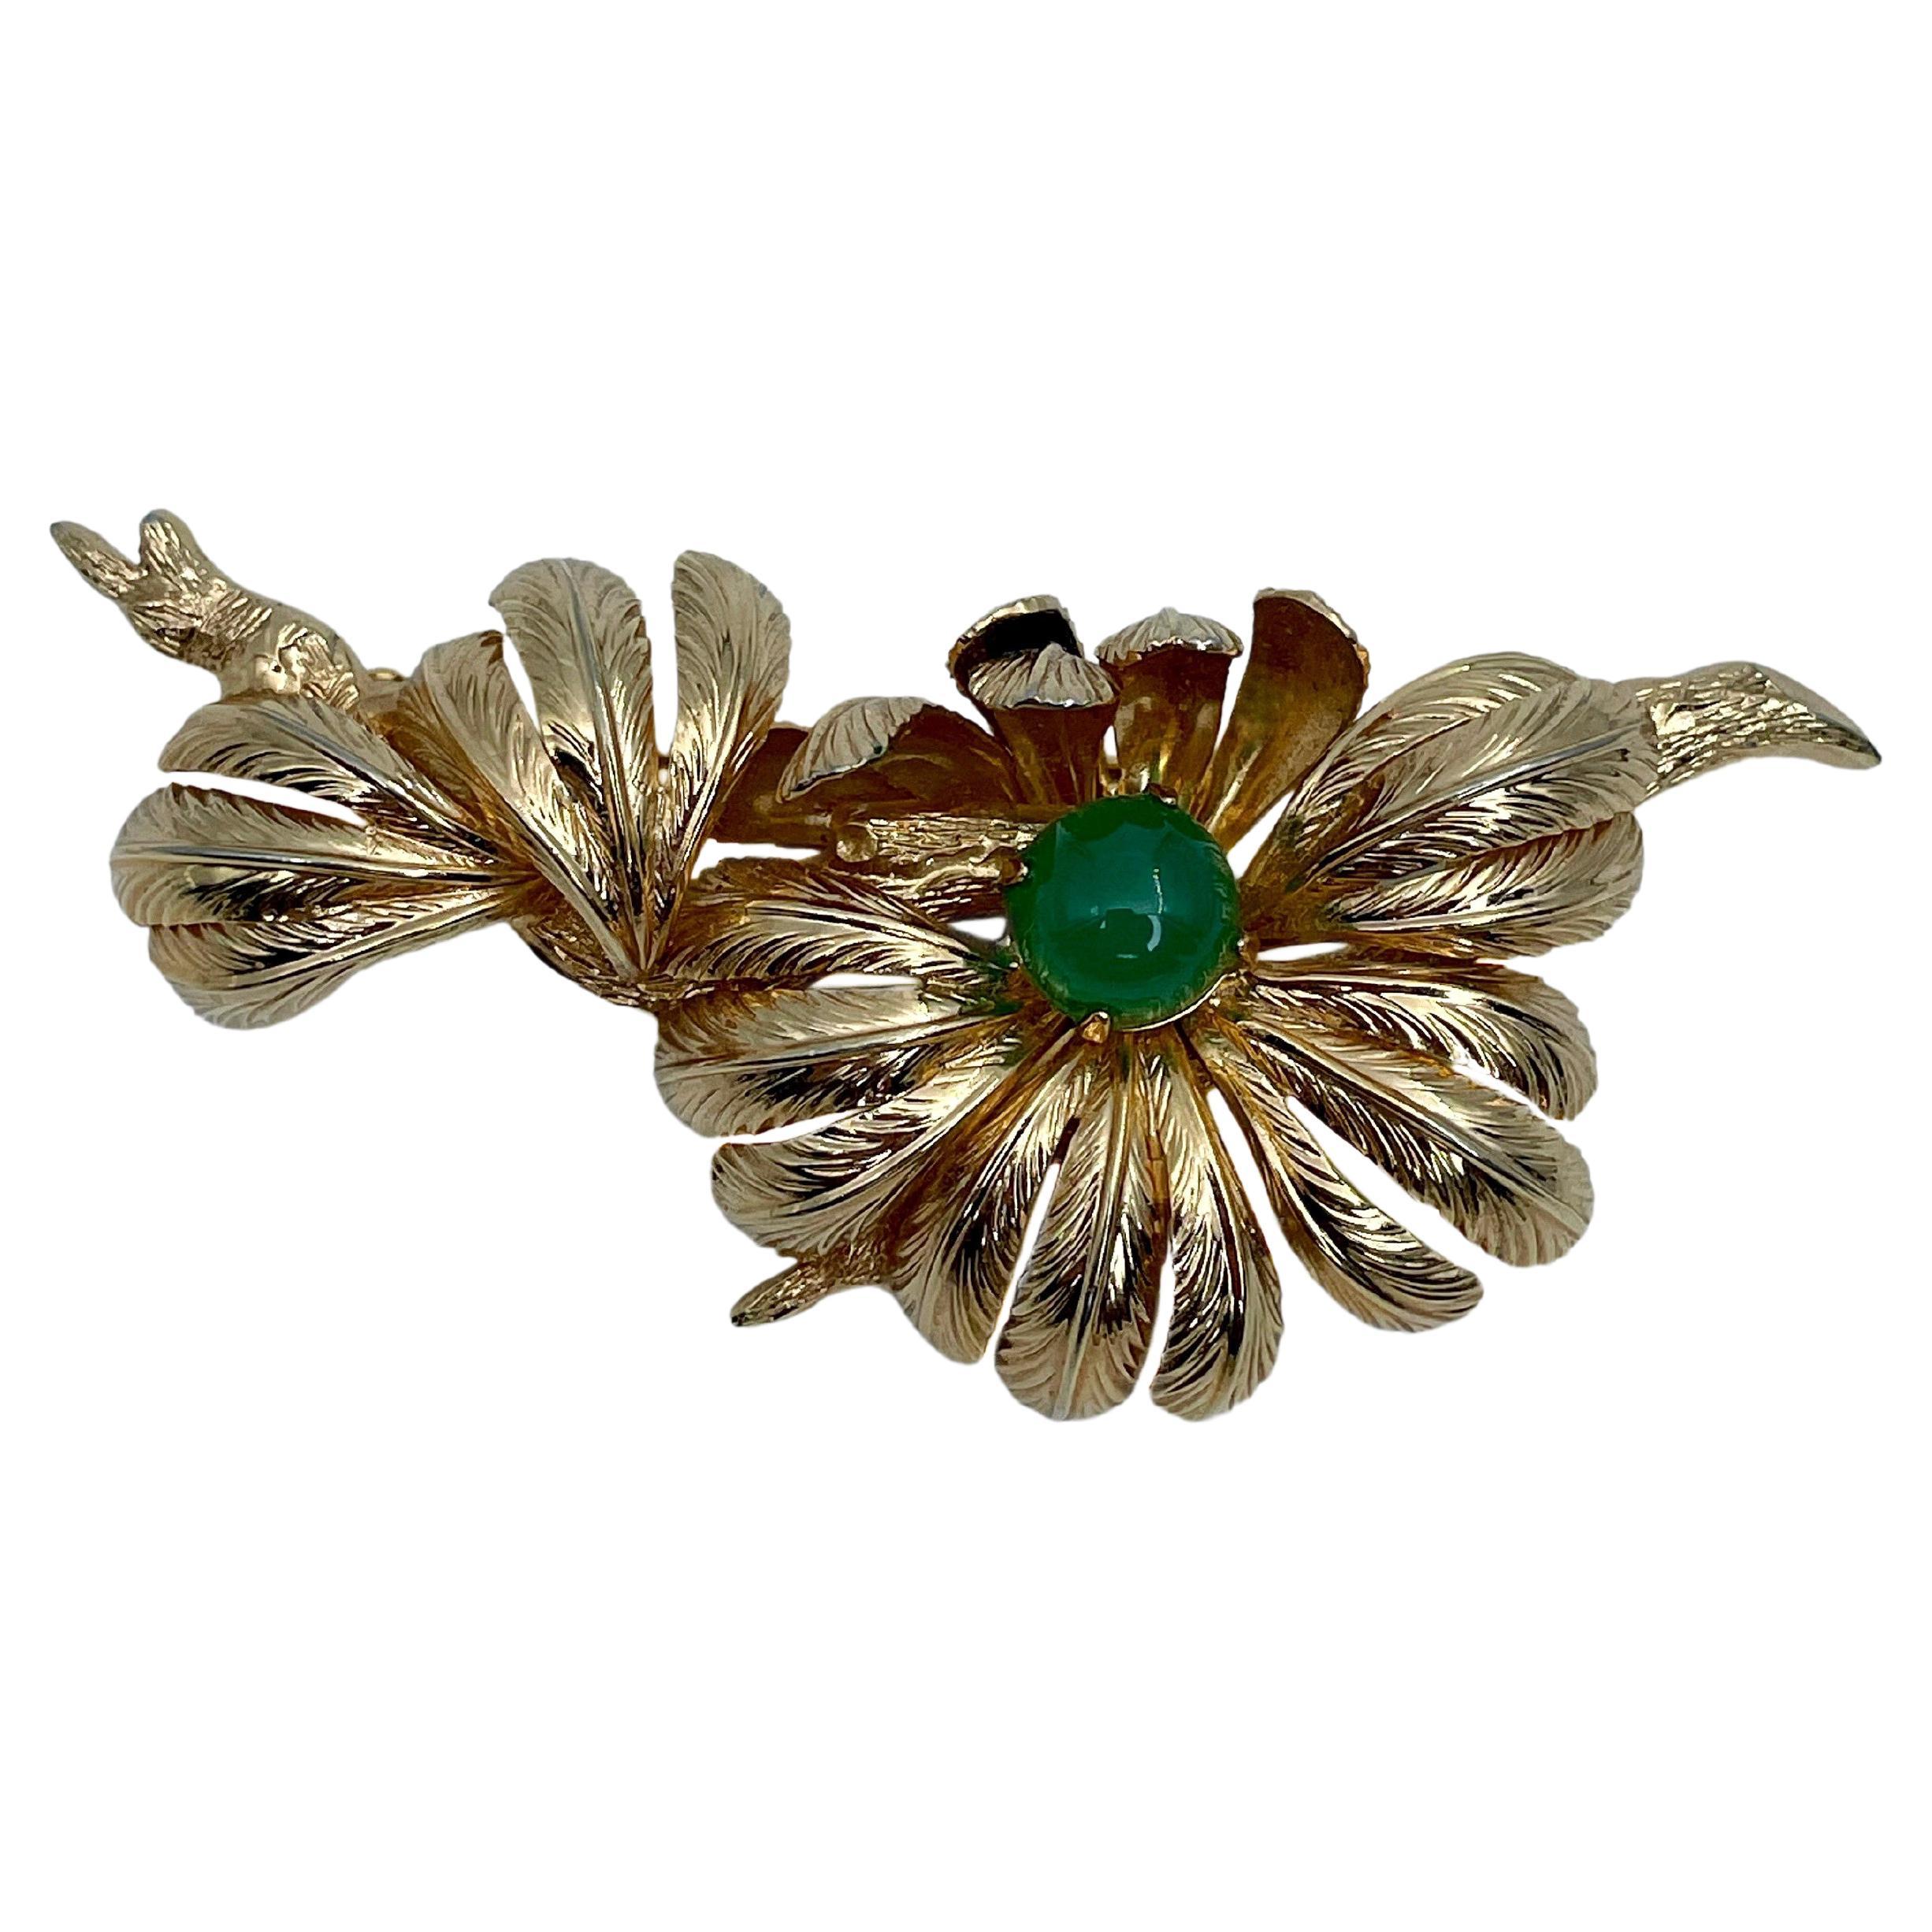 Vintage Collectibke Pin,brooch with Design